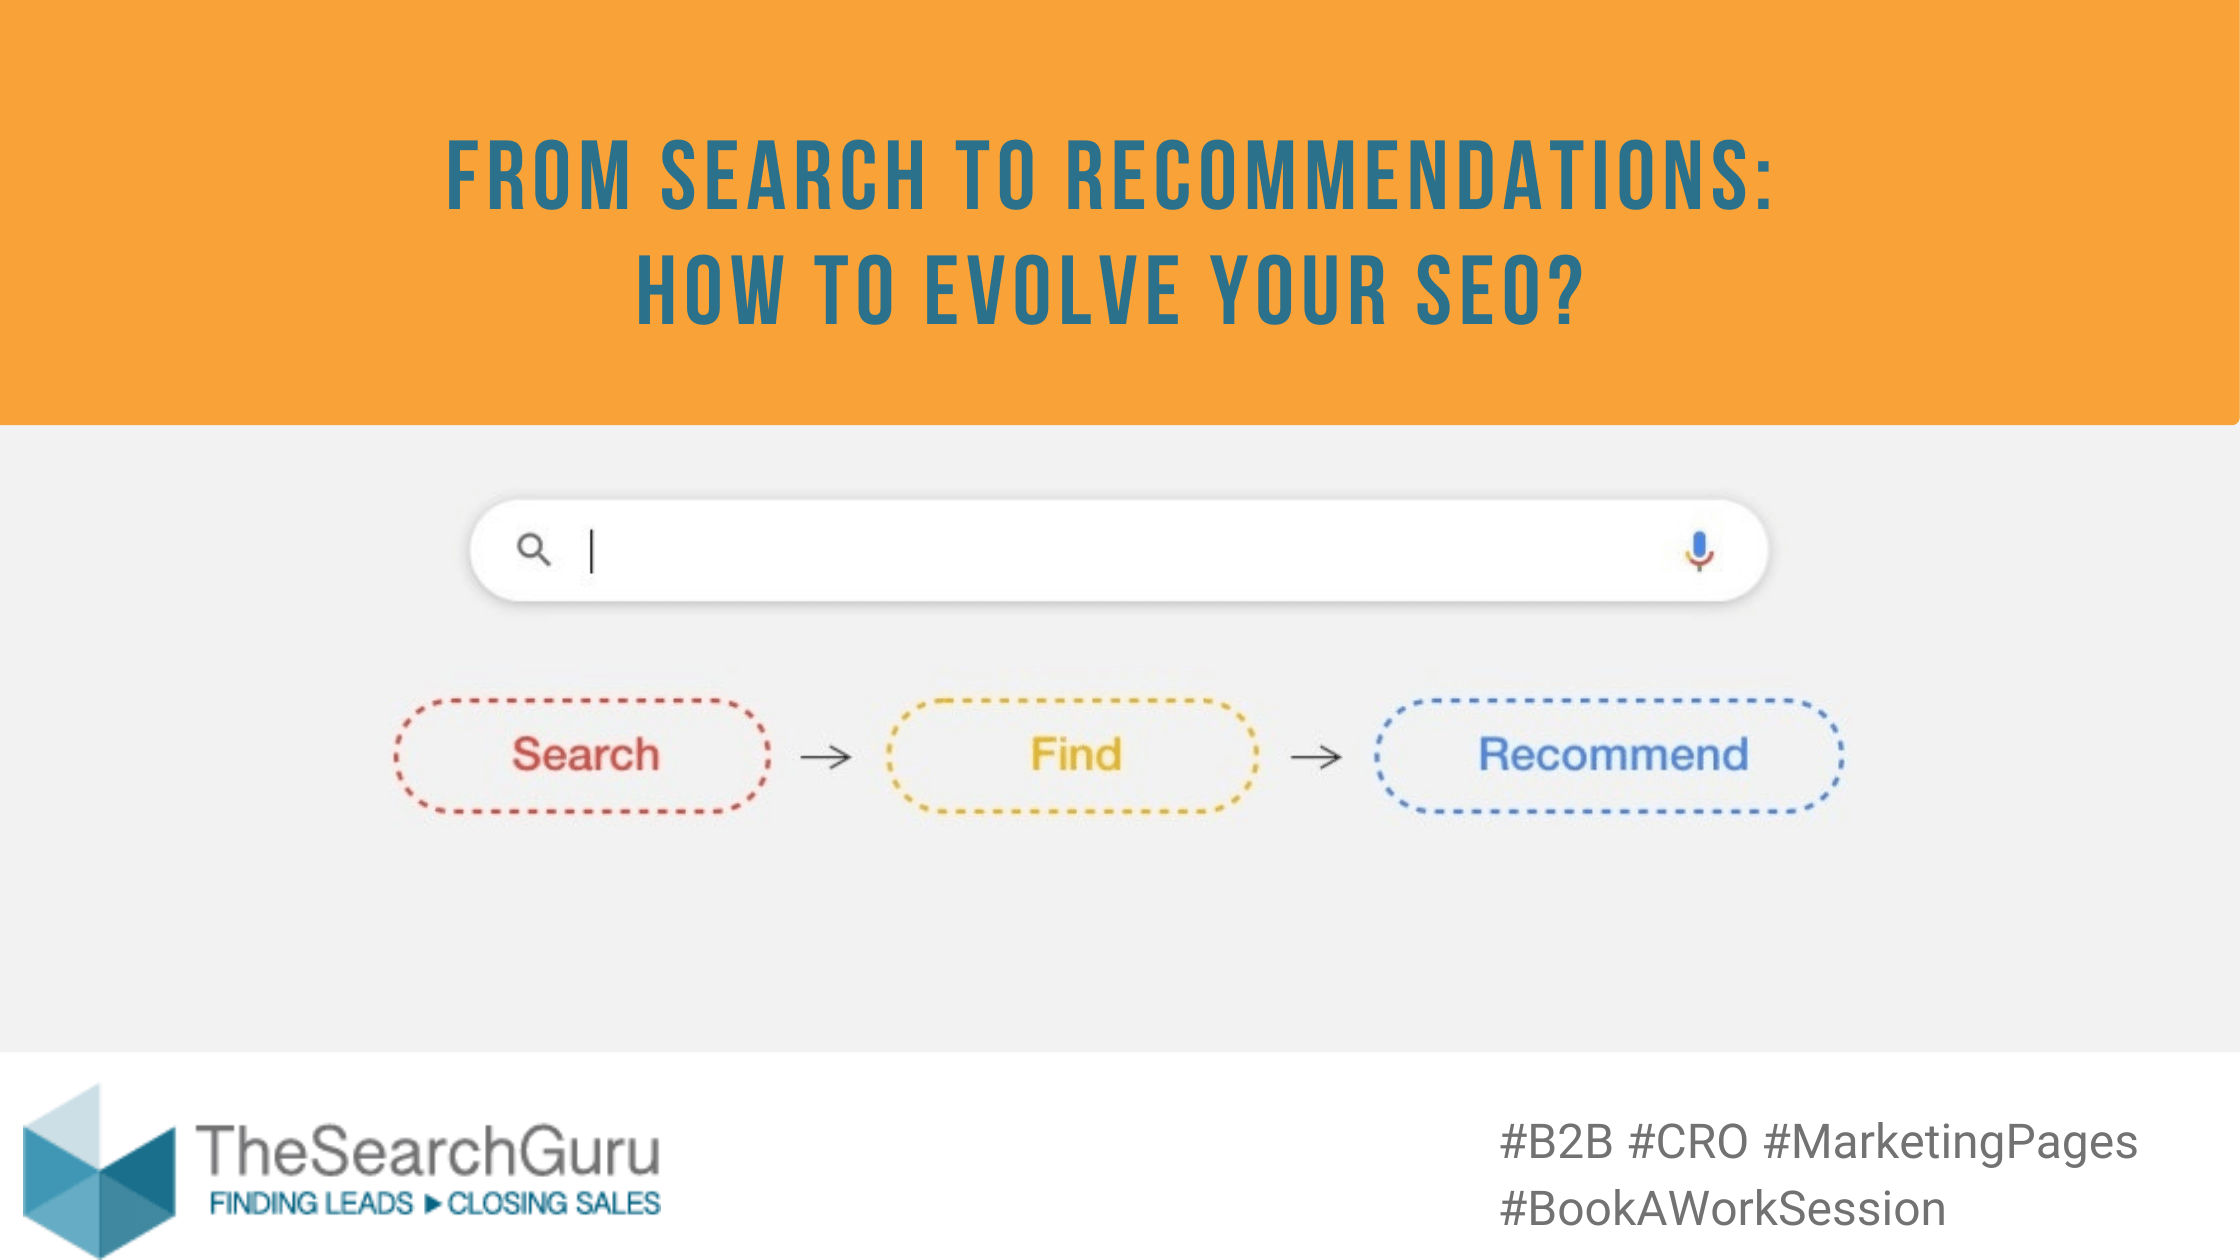 From Search to Recommendation - How to evolve your SEO